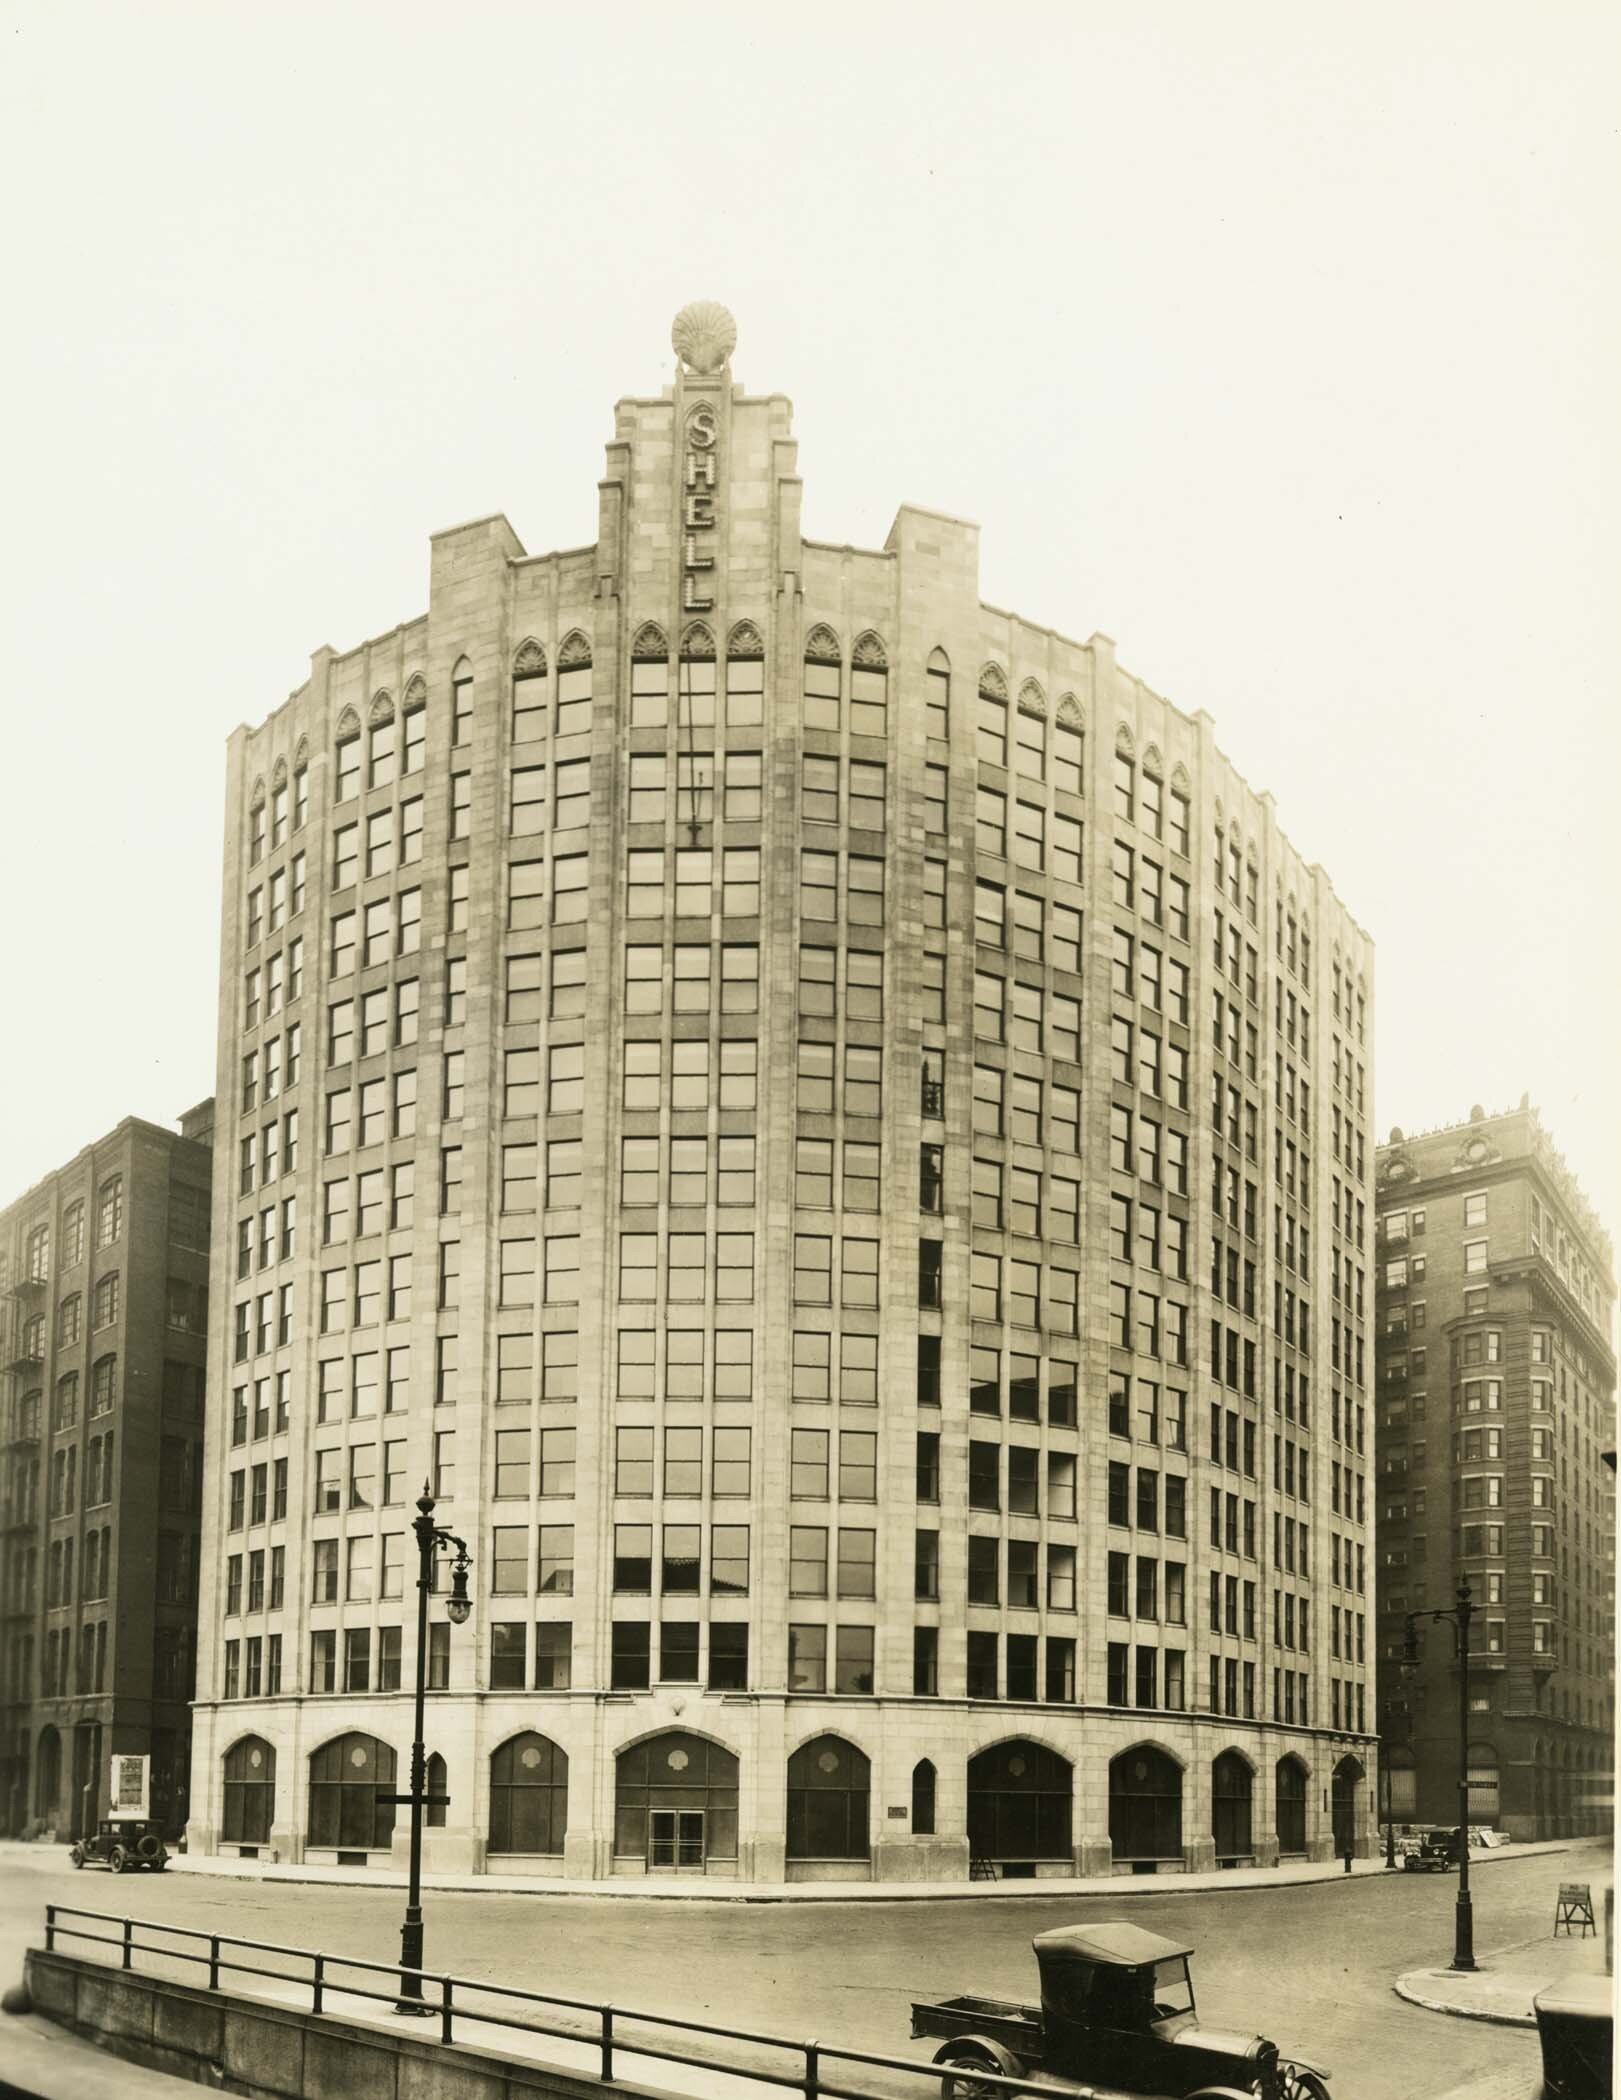 SHELL BUILDING – ST. LOUIS, MO